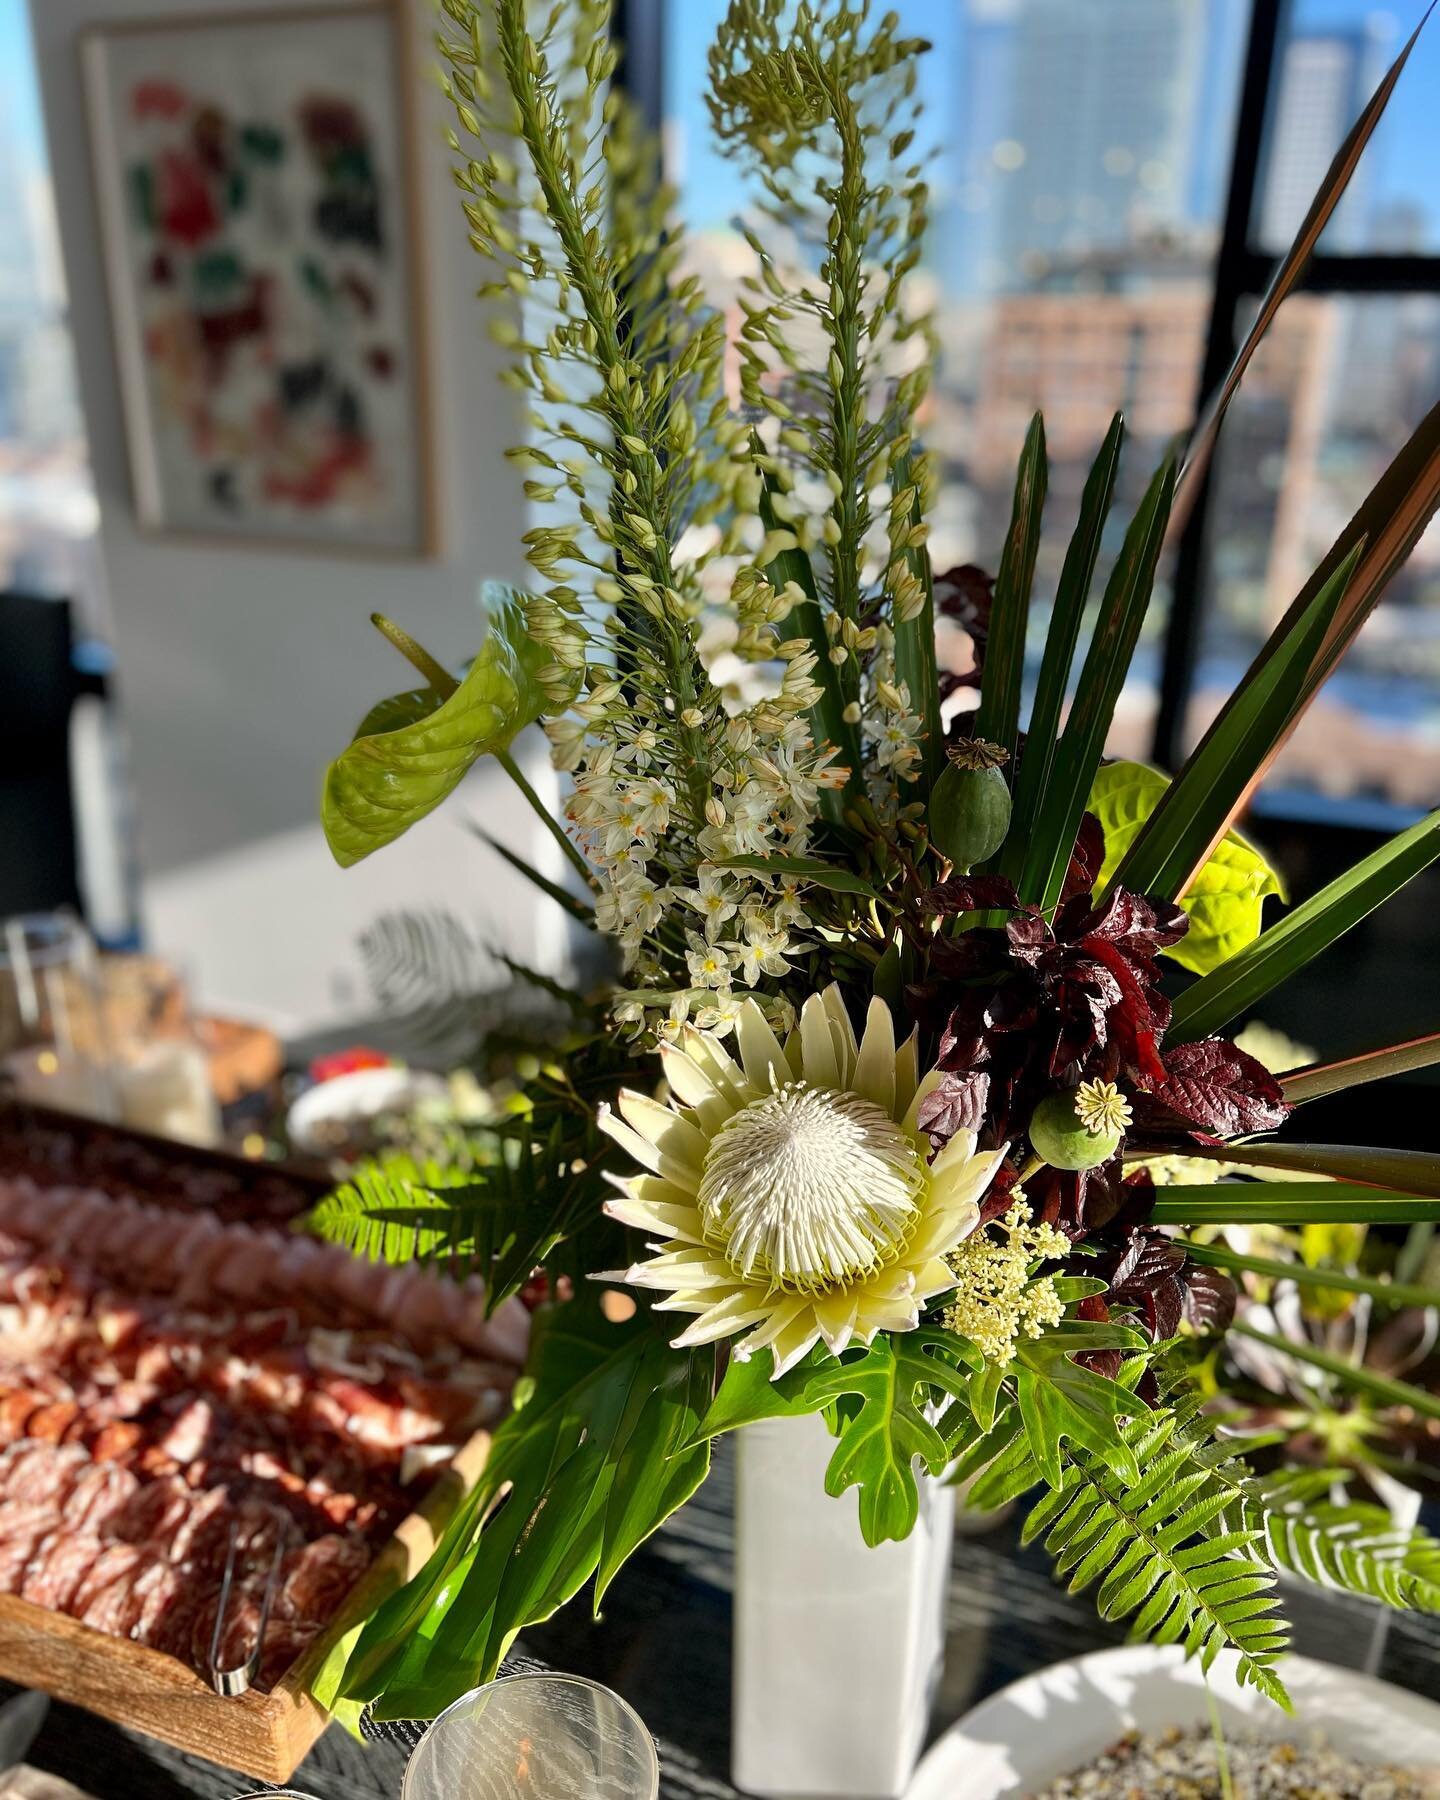 Food and floral take center stage for a Cocktail party at private residence with chefs @matthias1966 and @jasonhammel.  Floral by @pistilandvine.  That light tho!

#racheldemarteevents #eventplanner #cocktailparty #luxuryevents #luxuryeventplanner #b